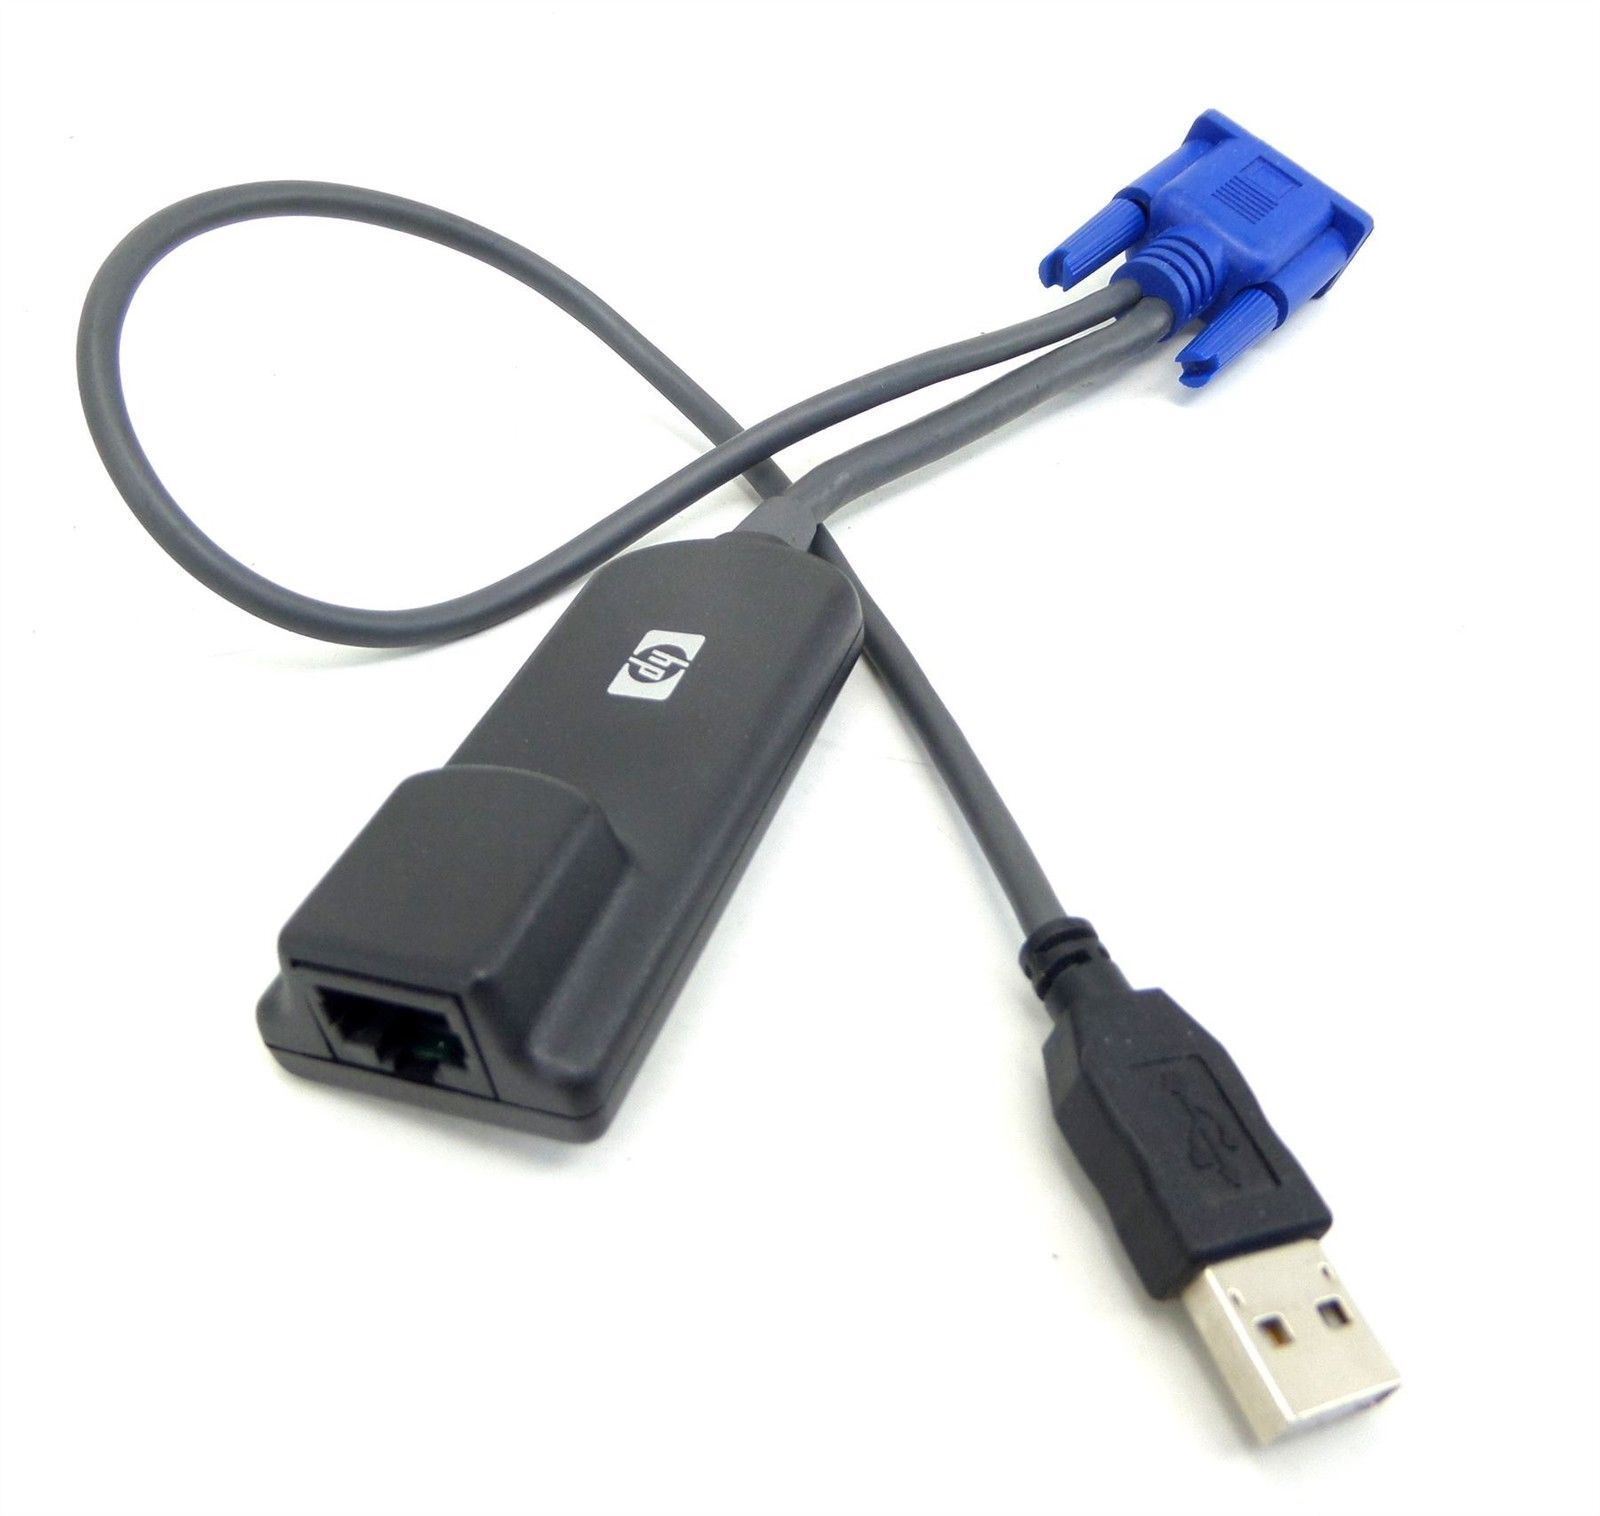 HP KVM USB Interface Adapter Cable 336047-B21, Spare Part No: 396633-001